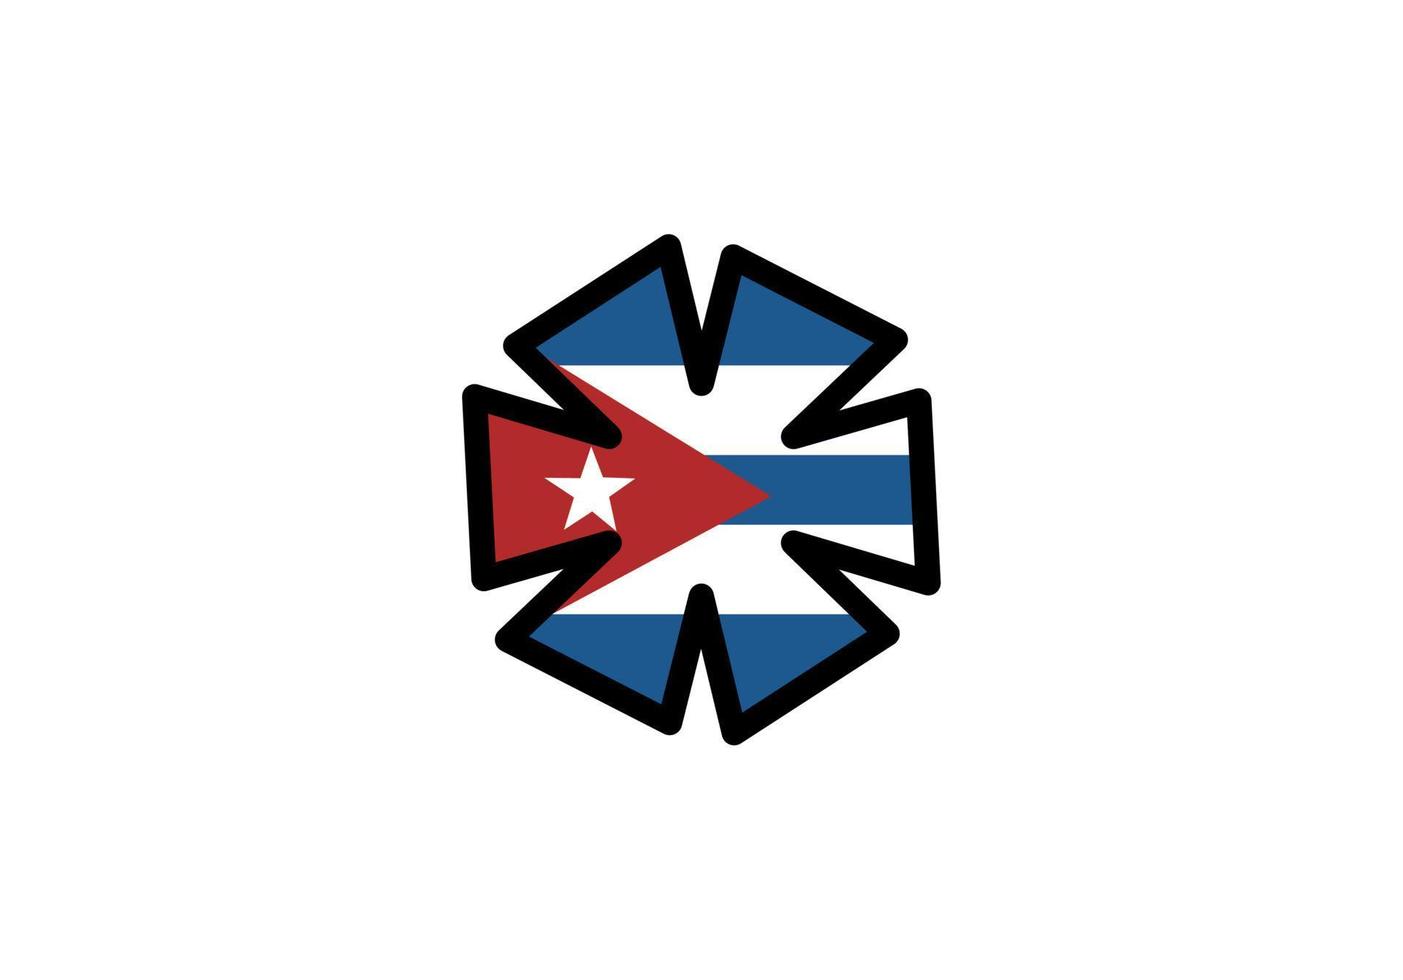 cuba flag icon, illustration of national flag design with elegance concept vector